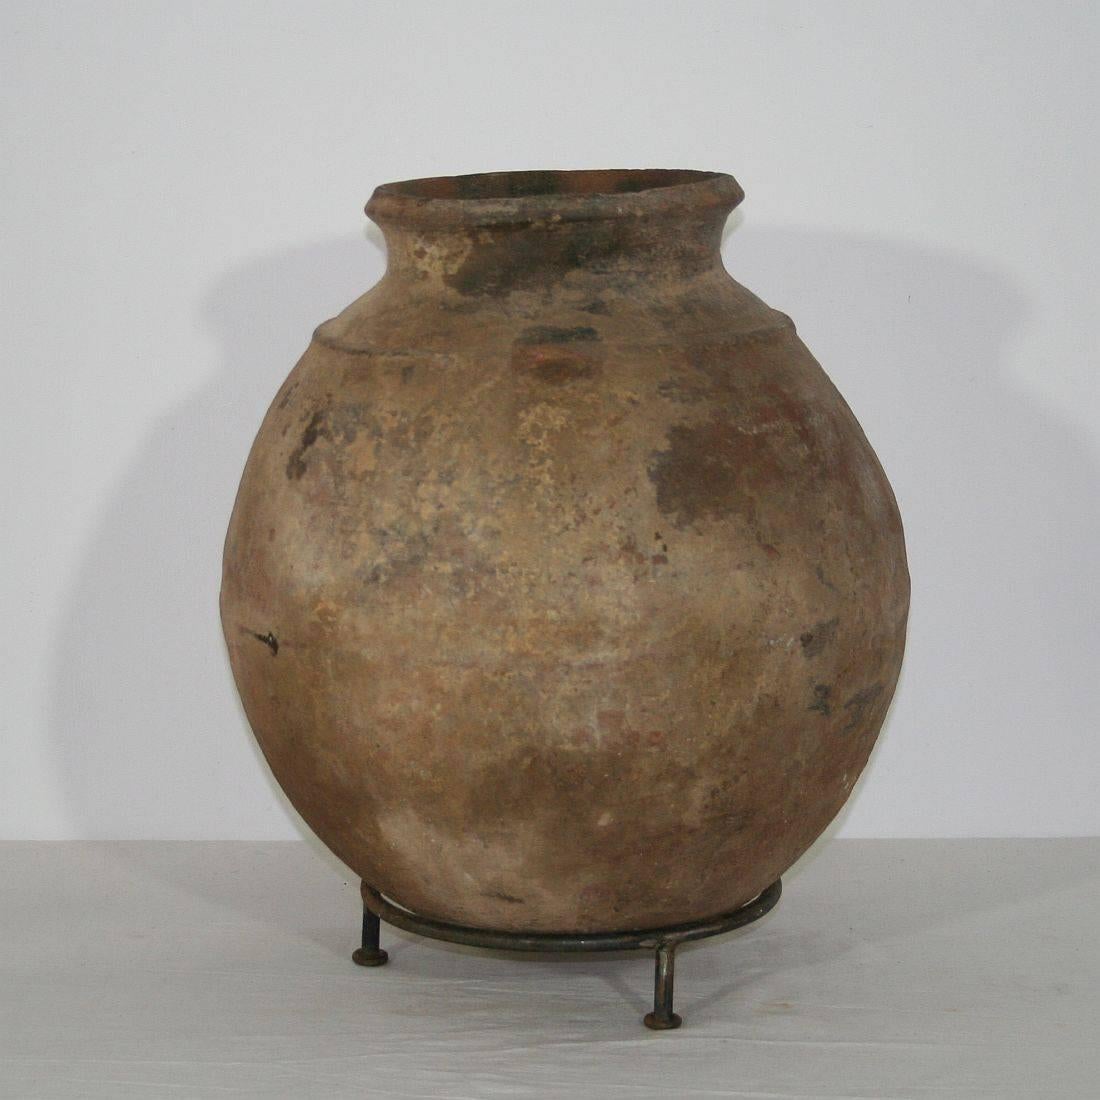 Great piece of pottery from Morocco, once used for storage.
Morocco, circa 1850
Weathered.